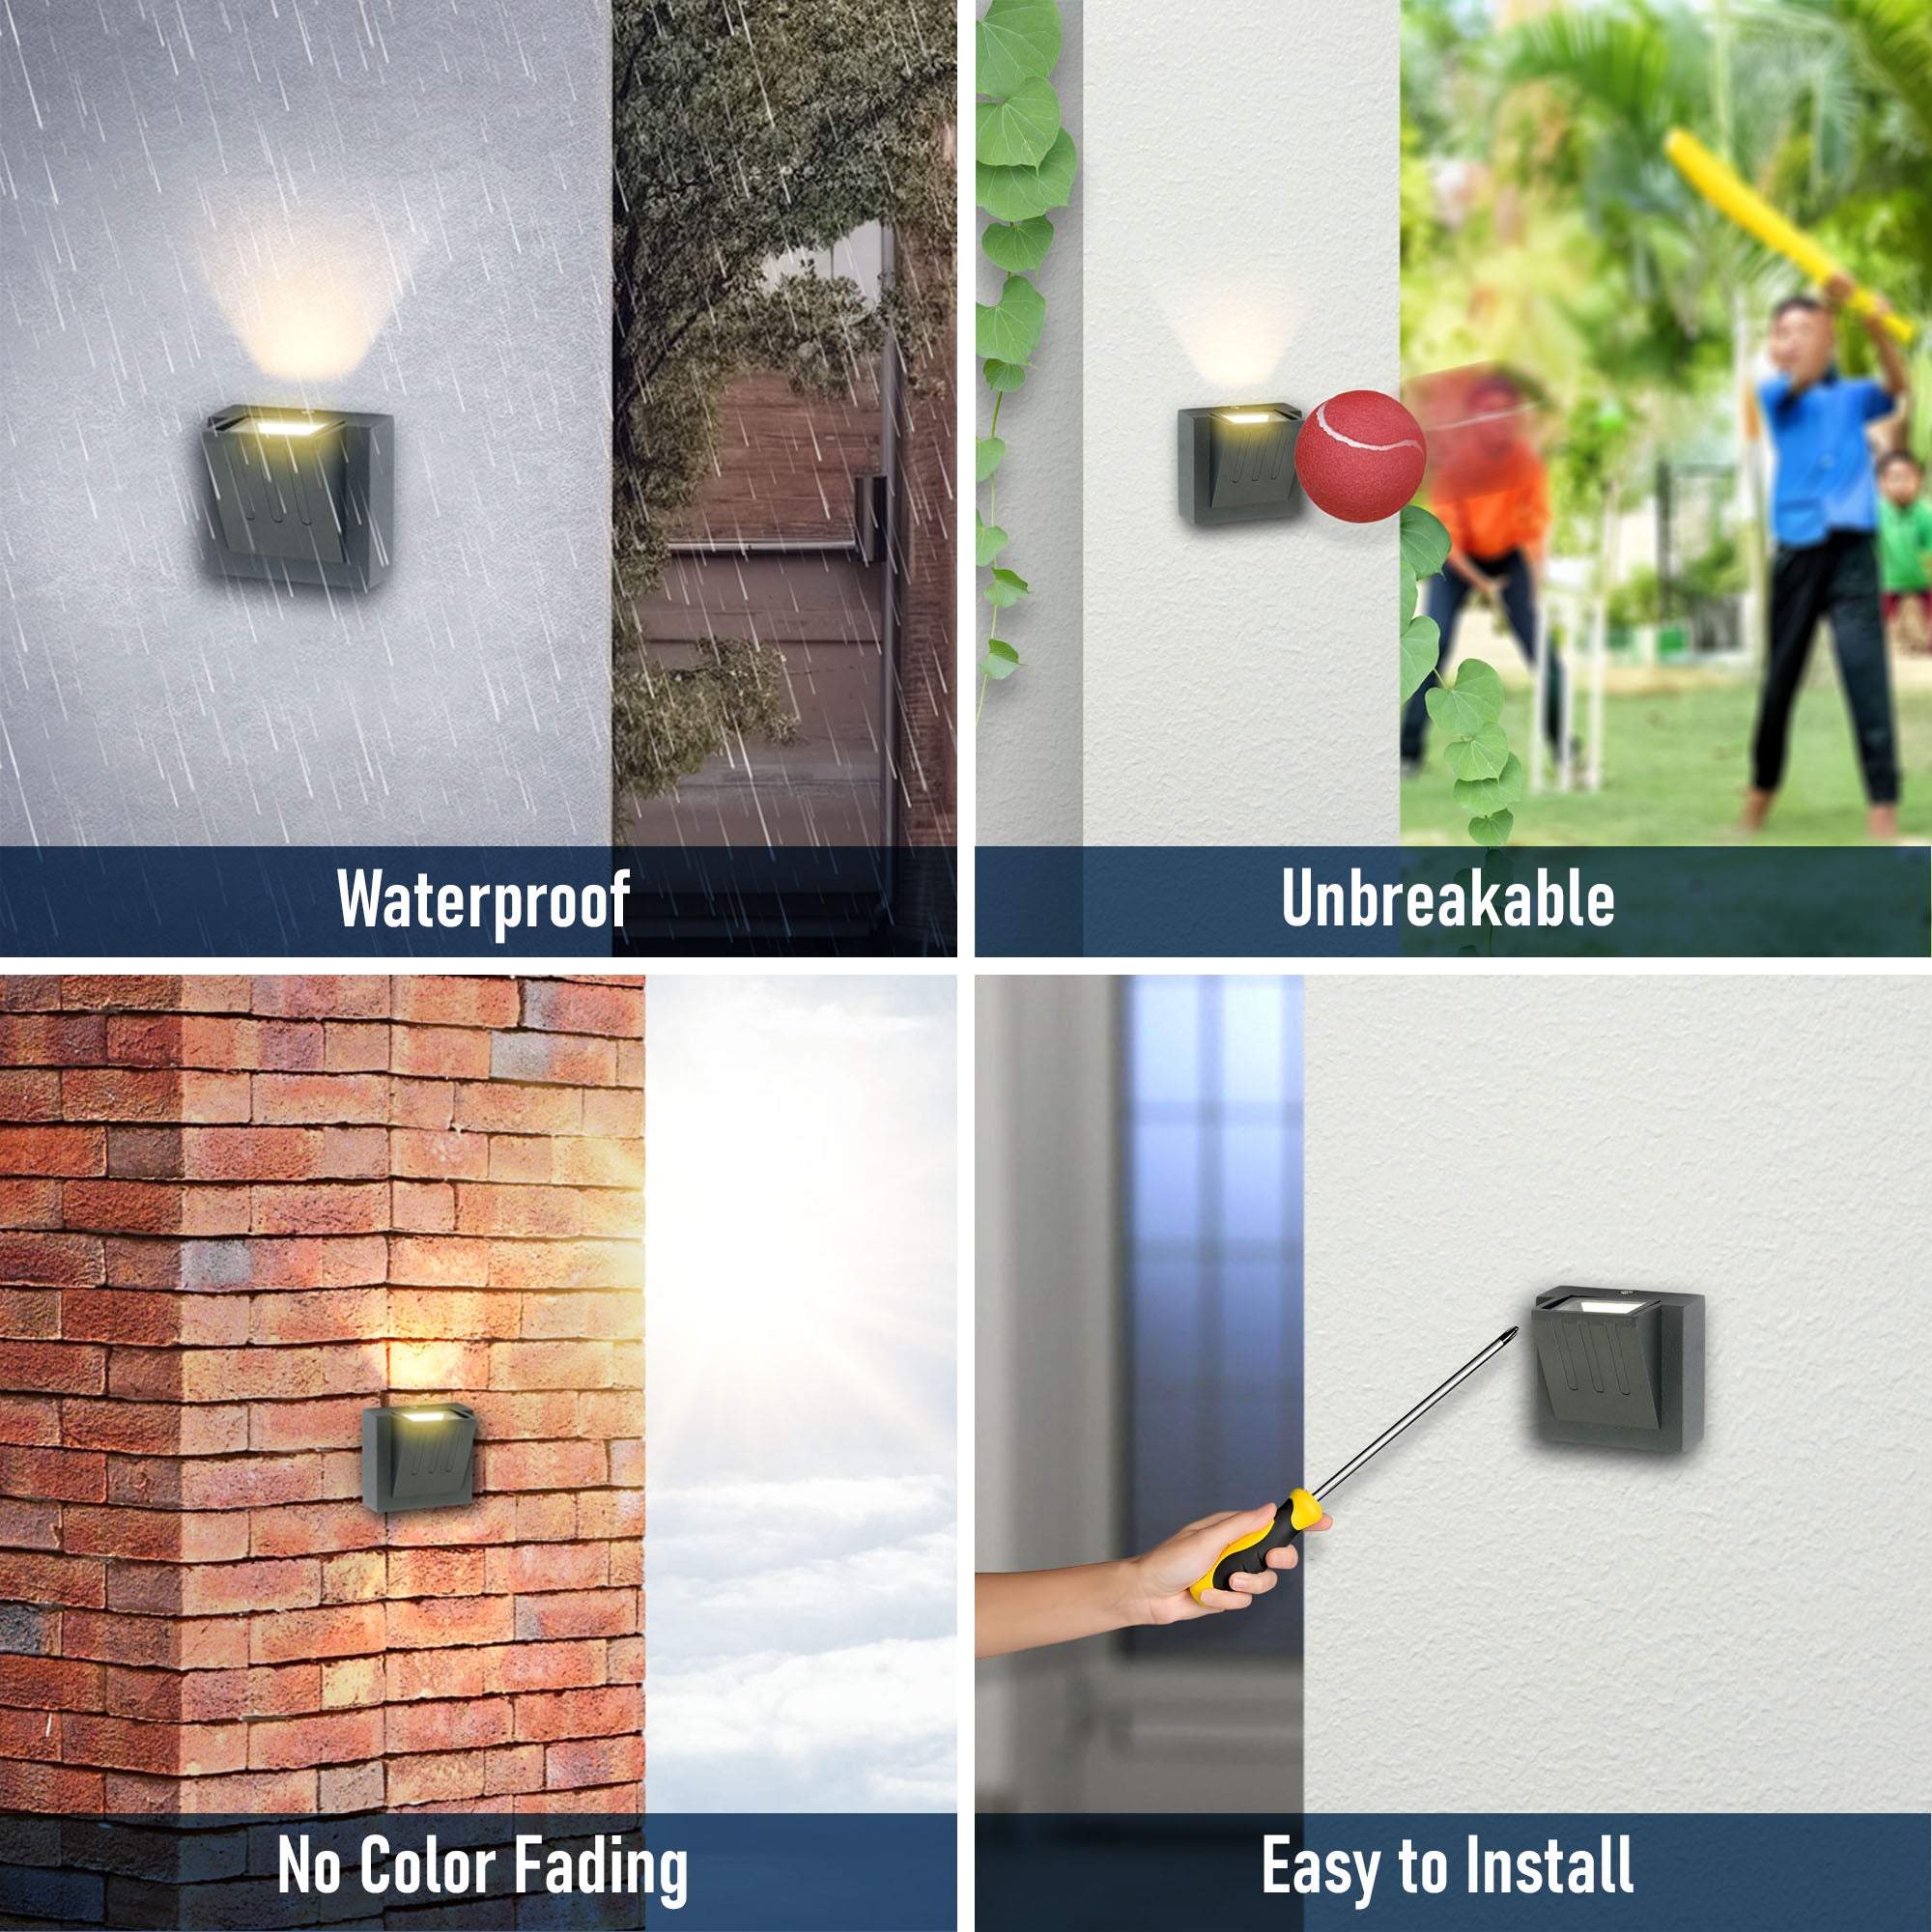 Features of Reina one way Reina led wall light #type_1 way